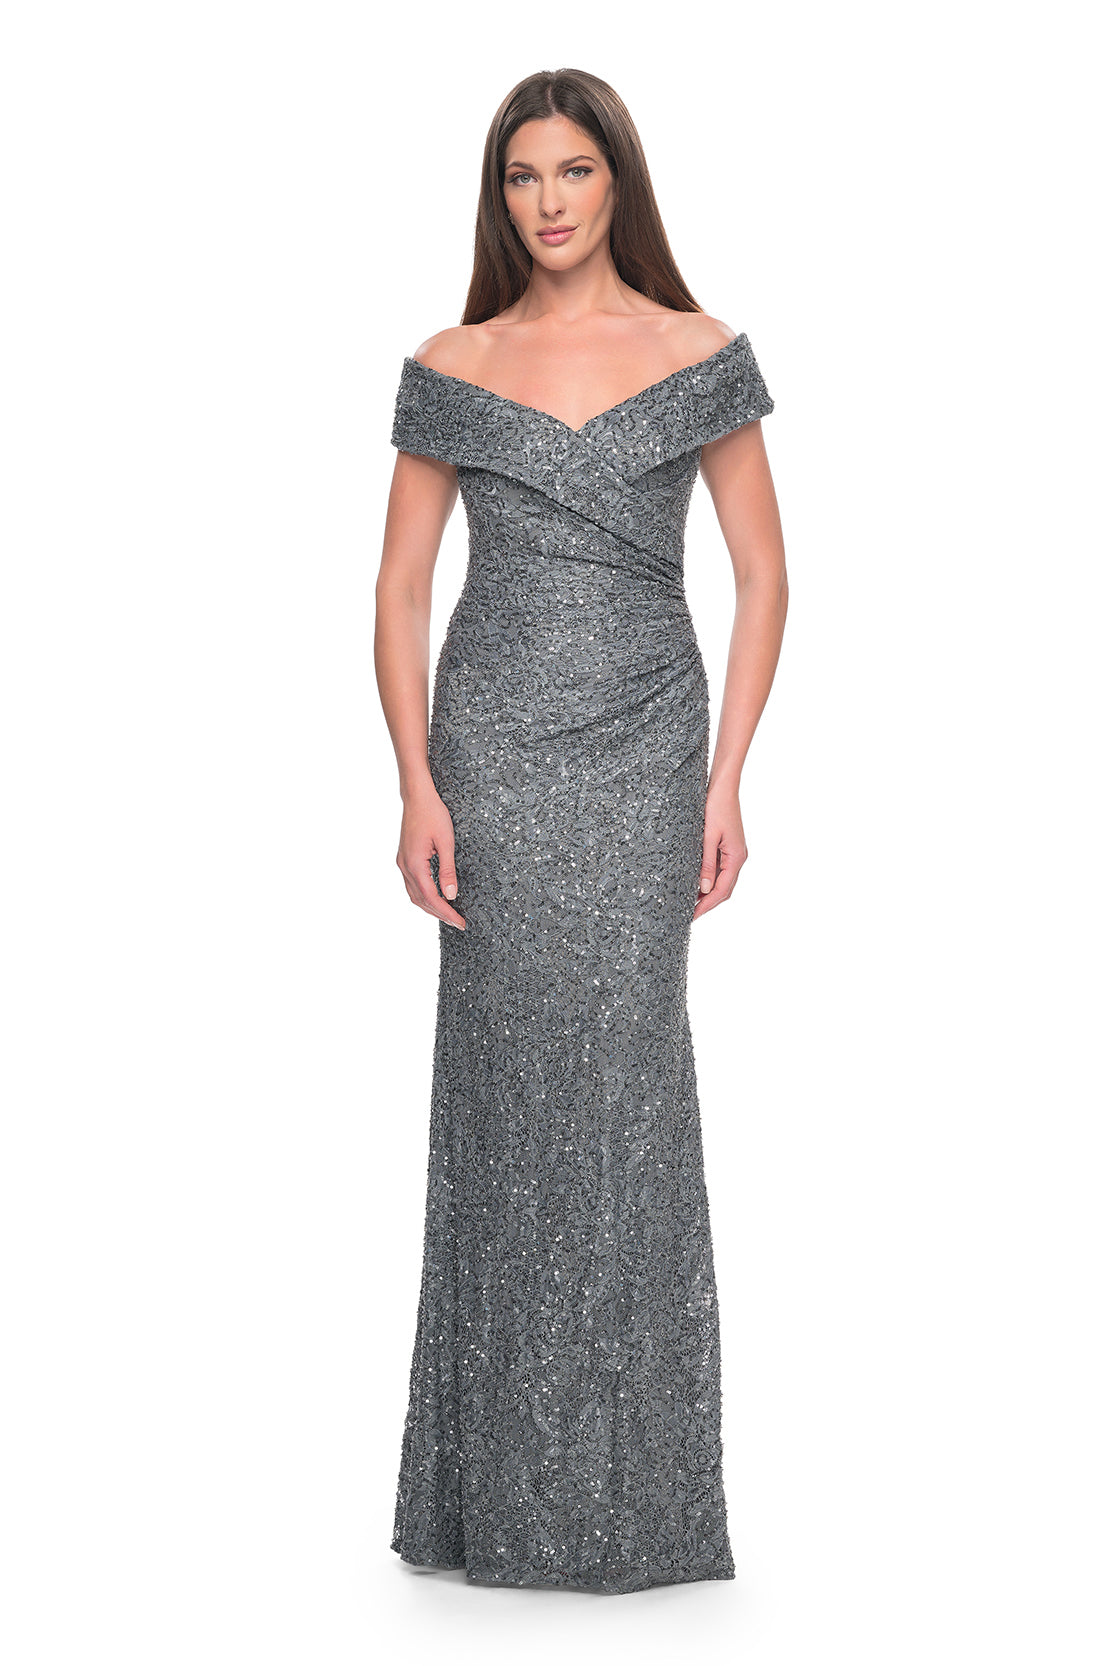 La Femme 31679 Enchanting Beaded Lace Off-the-Shoulder Evening Gown - A breathtaking ensemble featuring intricate beaded lace, off-the-shoulder design, ruching details, and a flattering V neckline for a look of timeless elegance.  The model is wearing the dress in the color gunmetal.